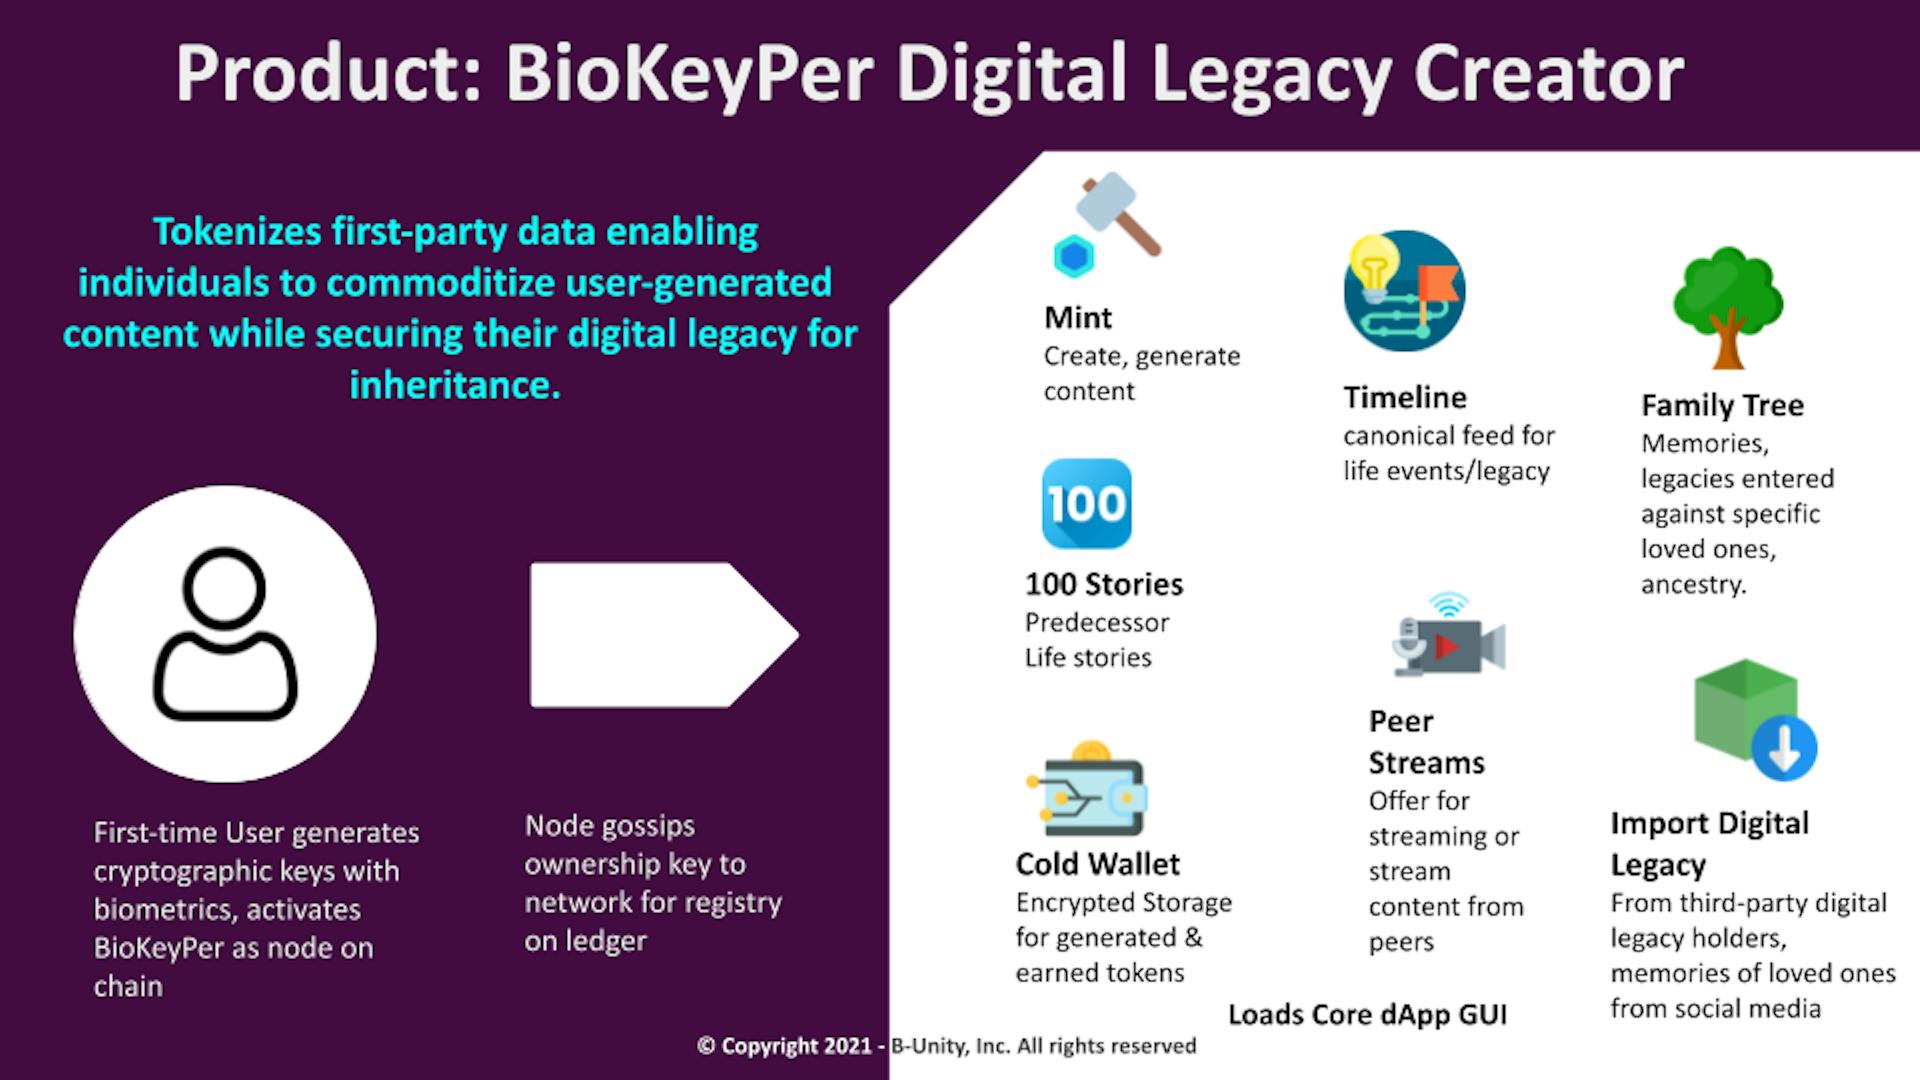 BioKeyPer Digital Legacy Creator gives every individual control over their digital oil in a first-party data future. (Copyright BioKeyPer, Inc.)